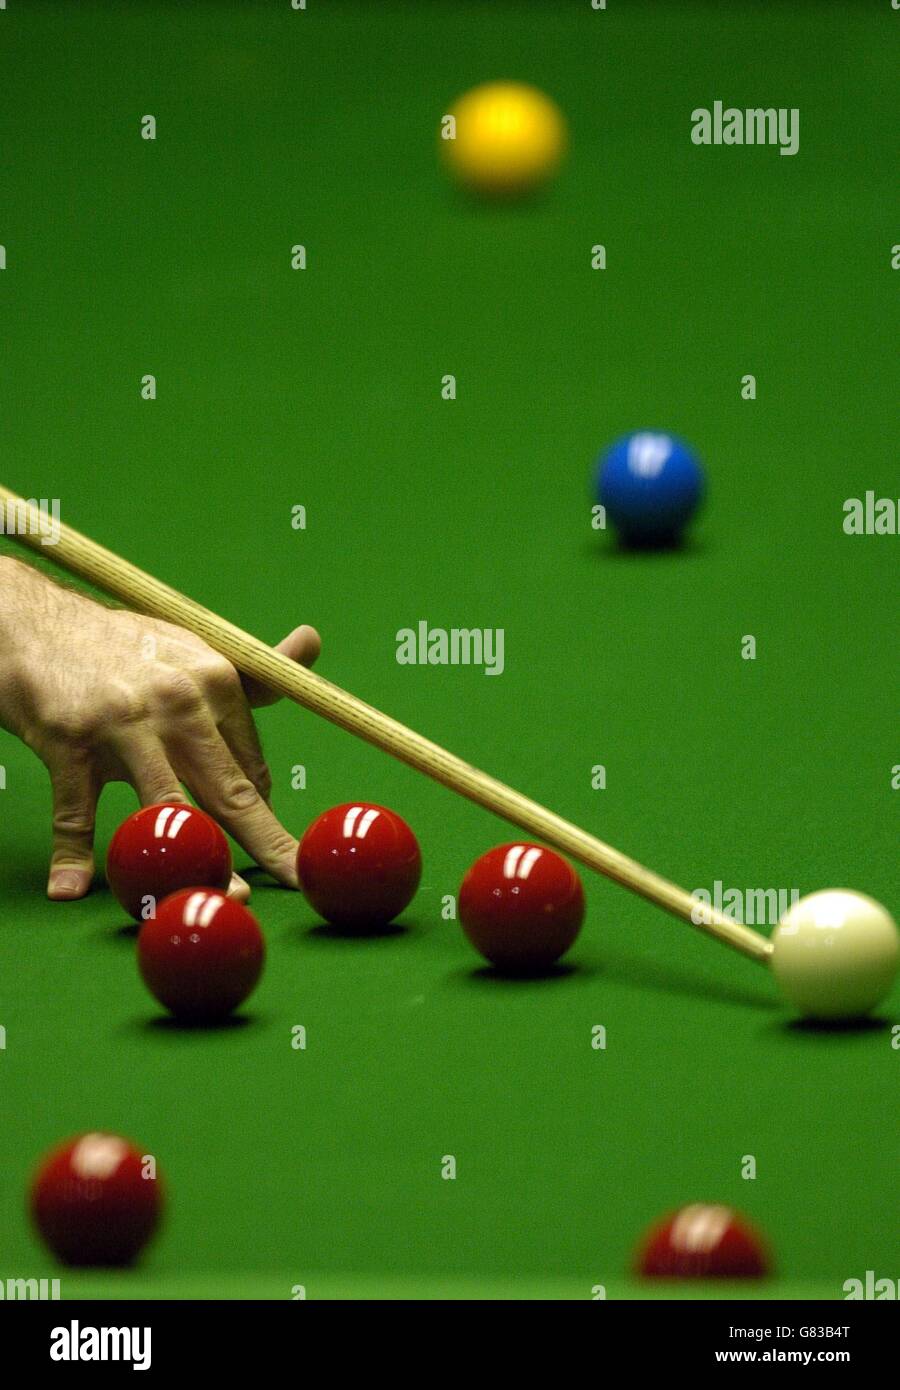 Snooker - Embassy World Championship 2005 - Second Round - Ronnie O'Sullivan v Allister Carter - The Crucible. Ronnie O'Sullivan lines up a shot during his match with Allister Carter. Stock Photo